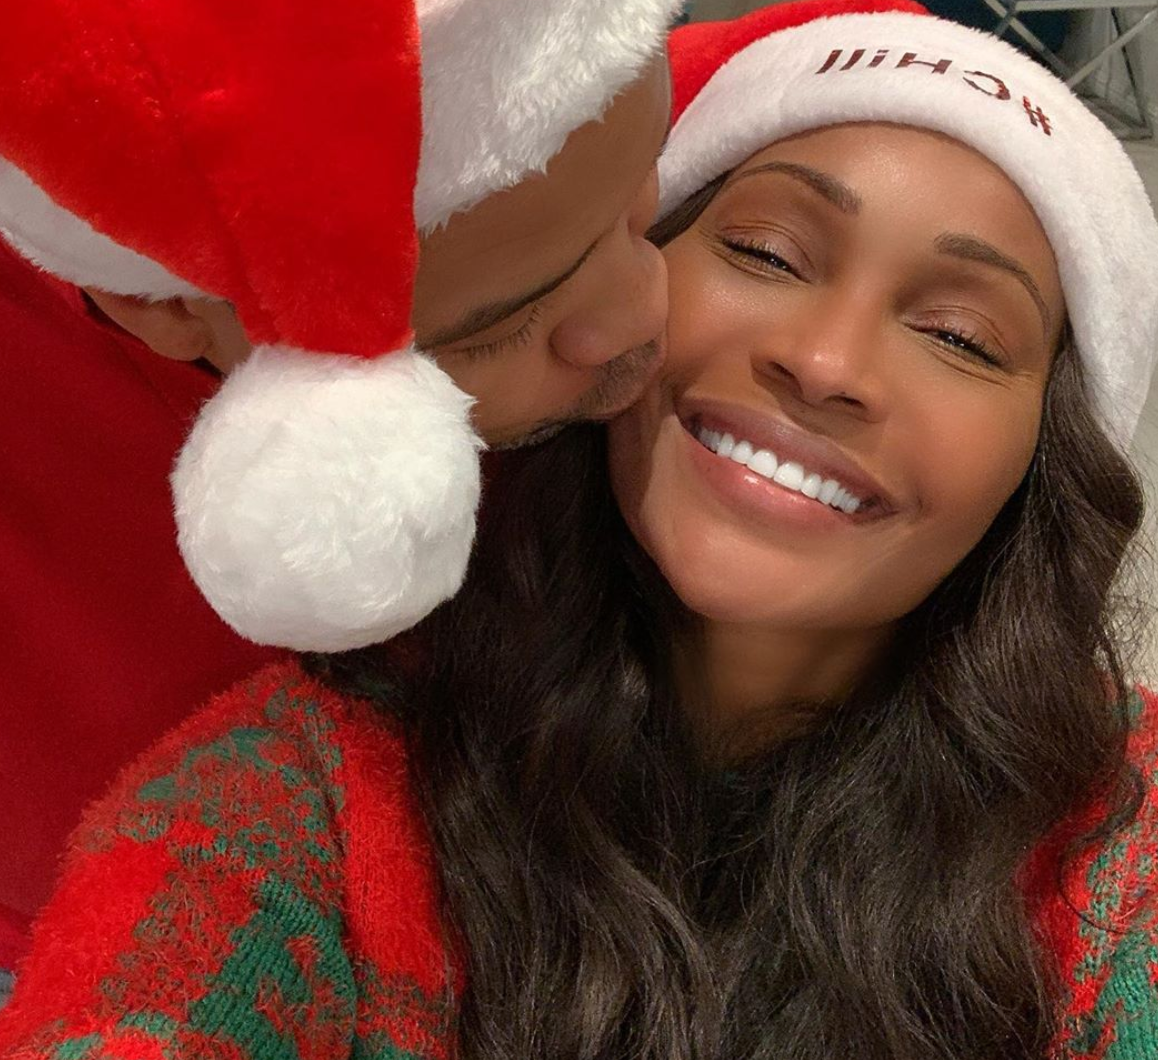 Beautiful Christmas family photos of black celebrities you may have missed